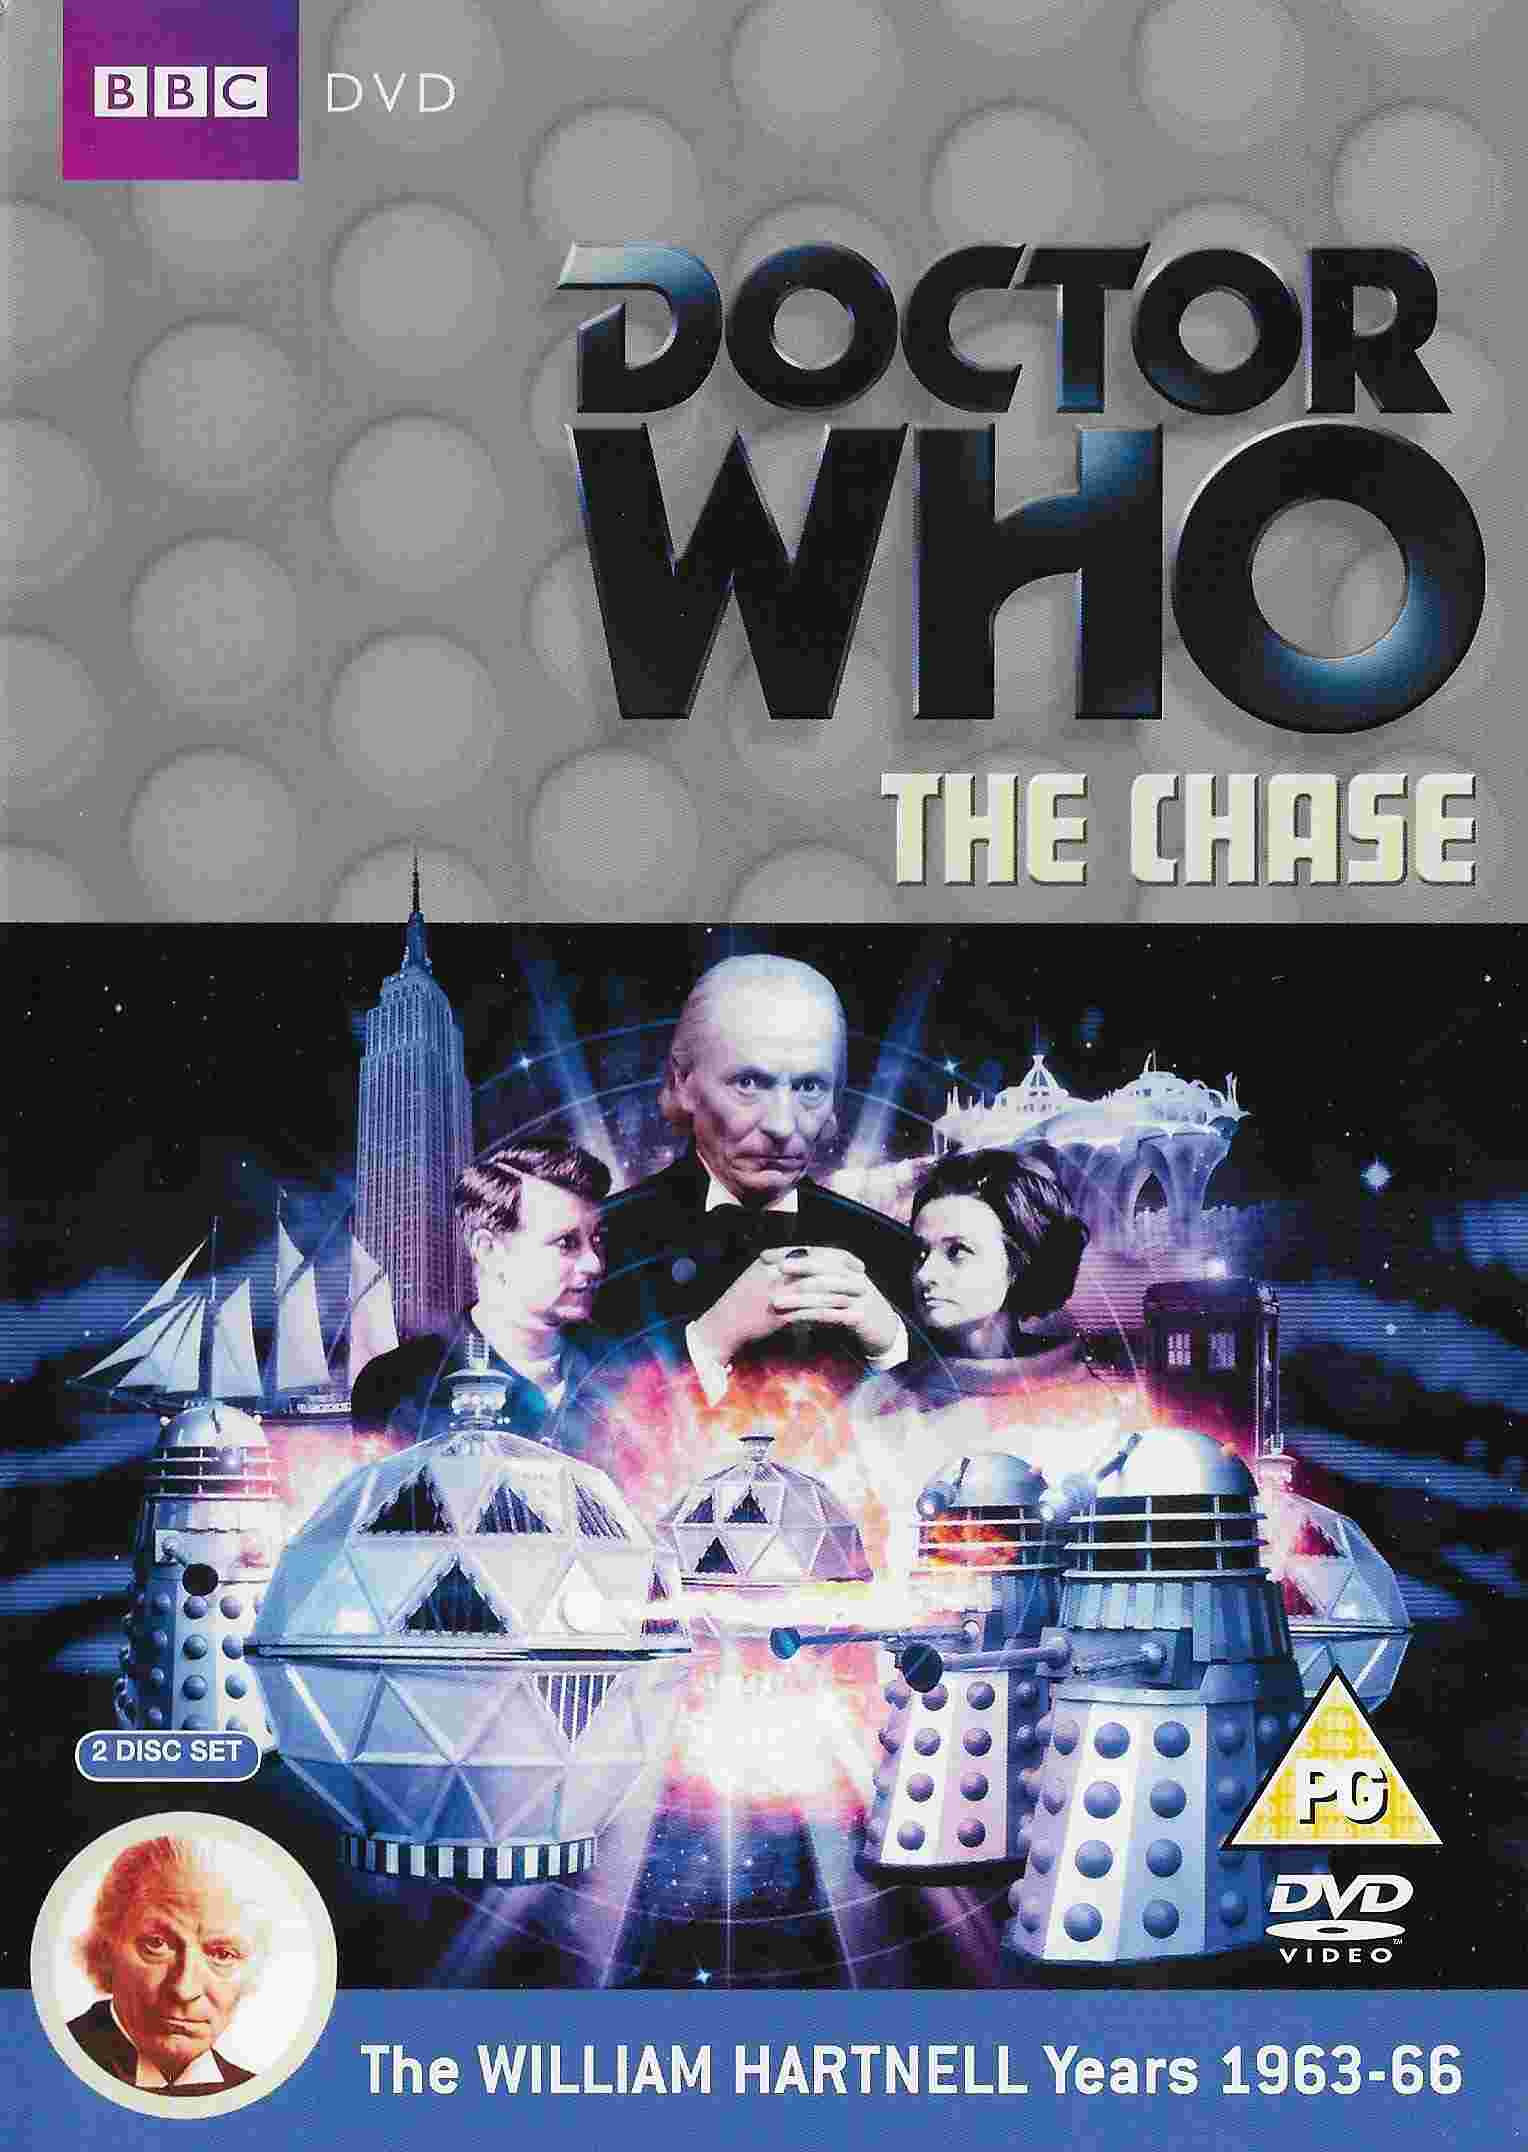 Picture of BBCDVD 2809B Doctor Who - The chase by artist Terry Nation from the BBC dvds - Records and Tapes library